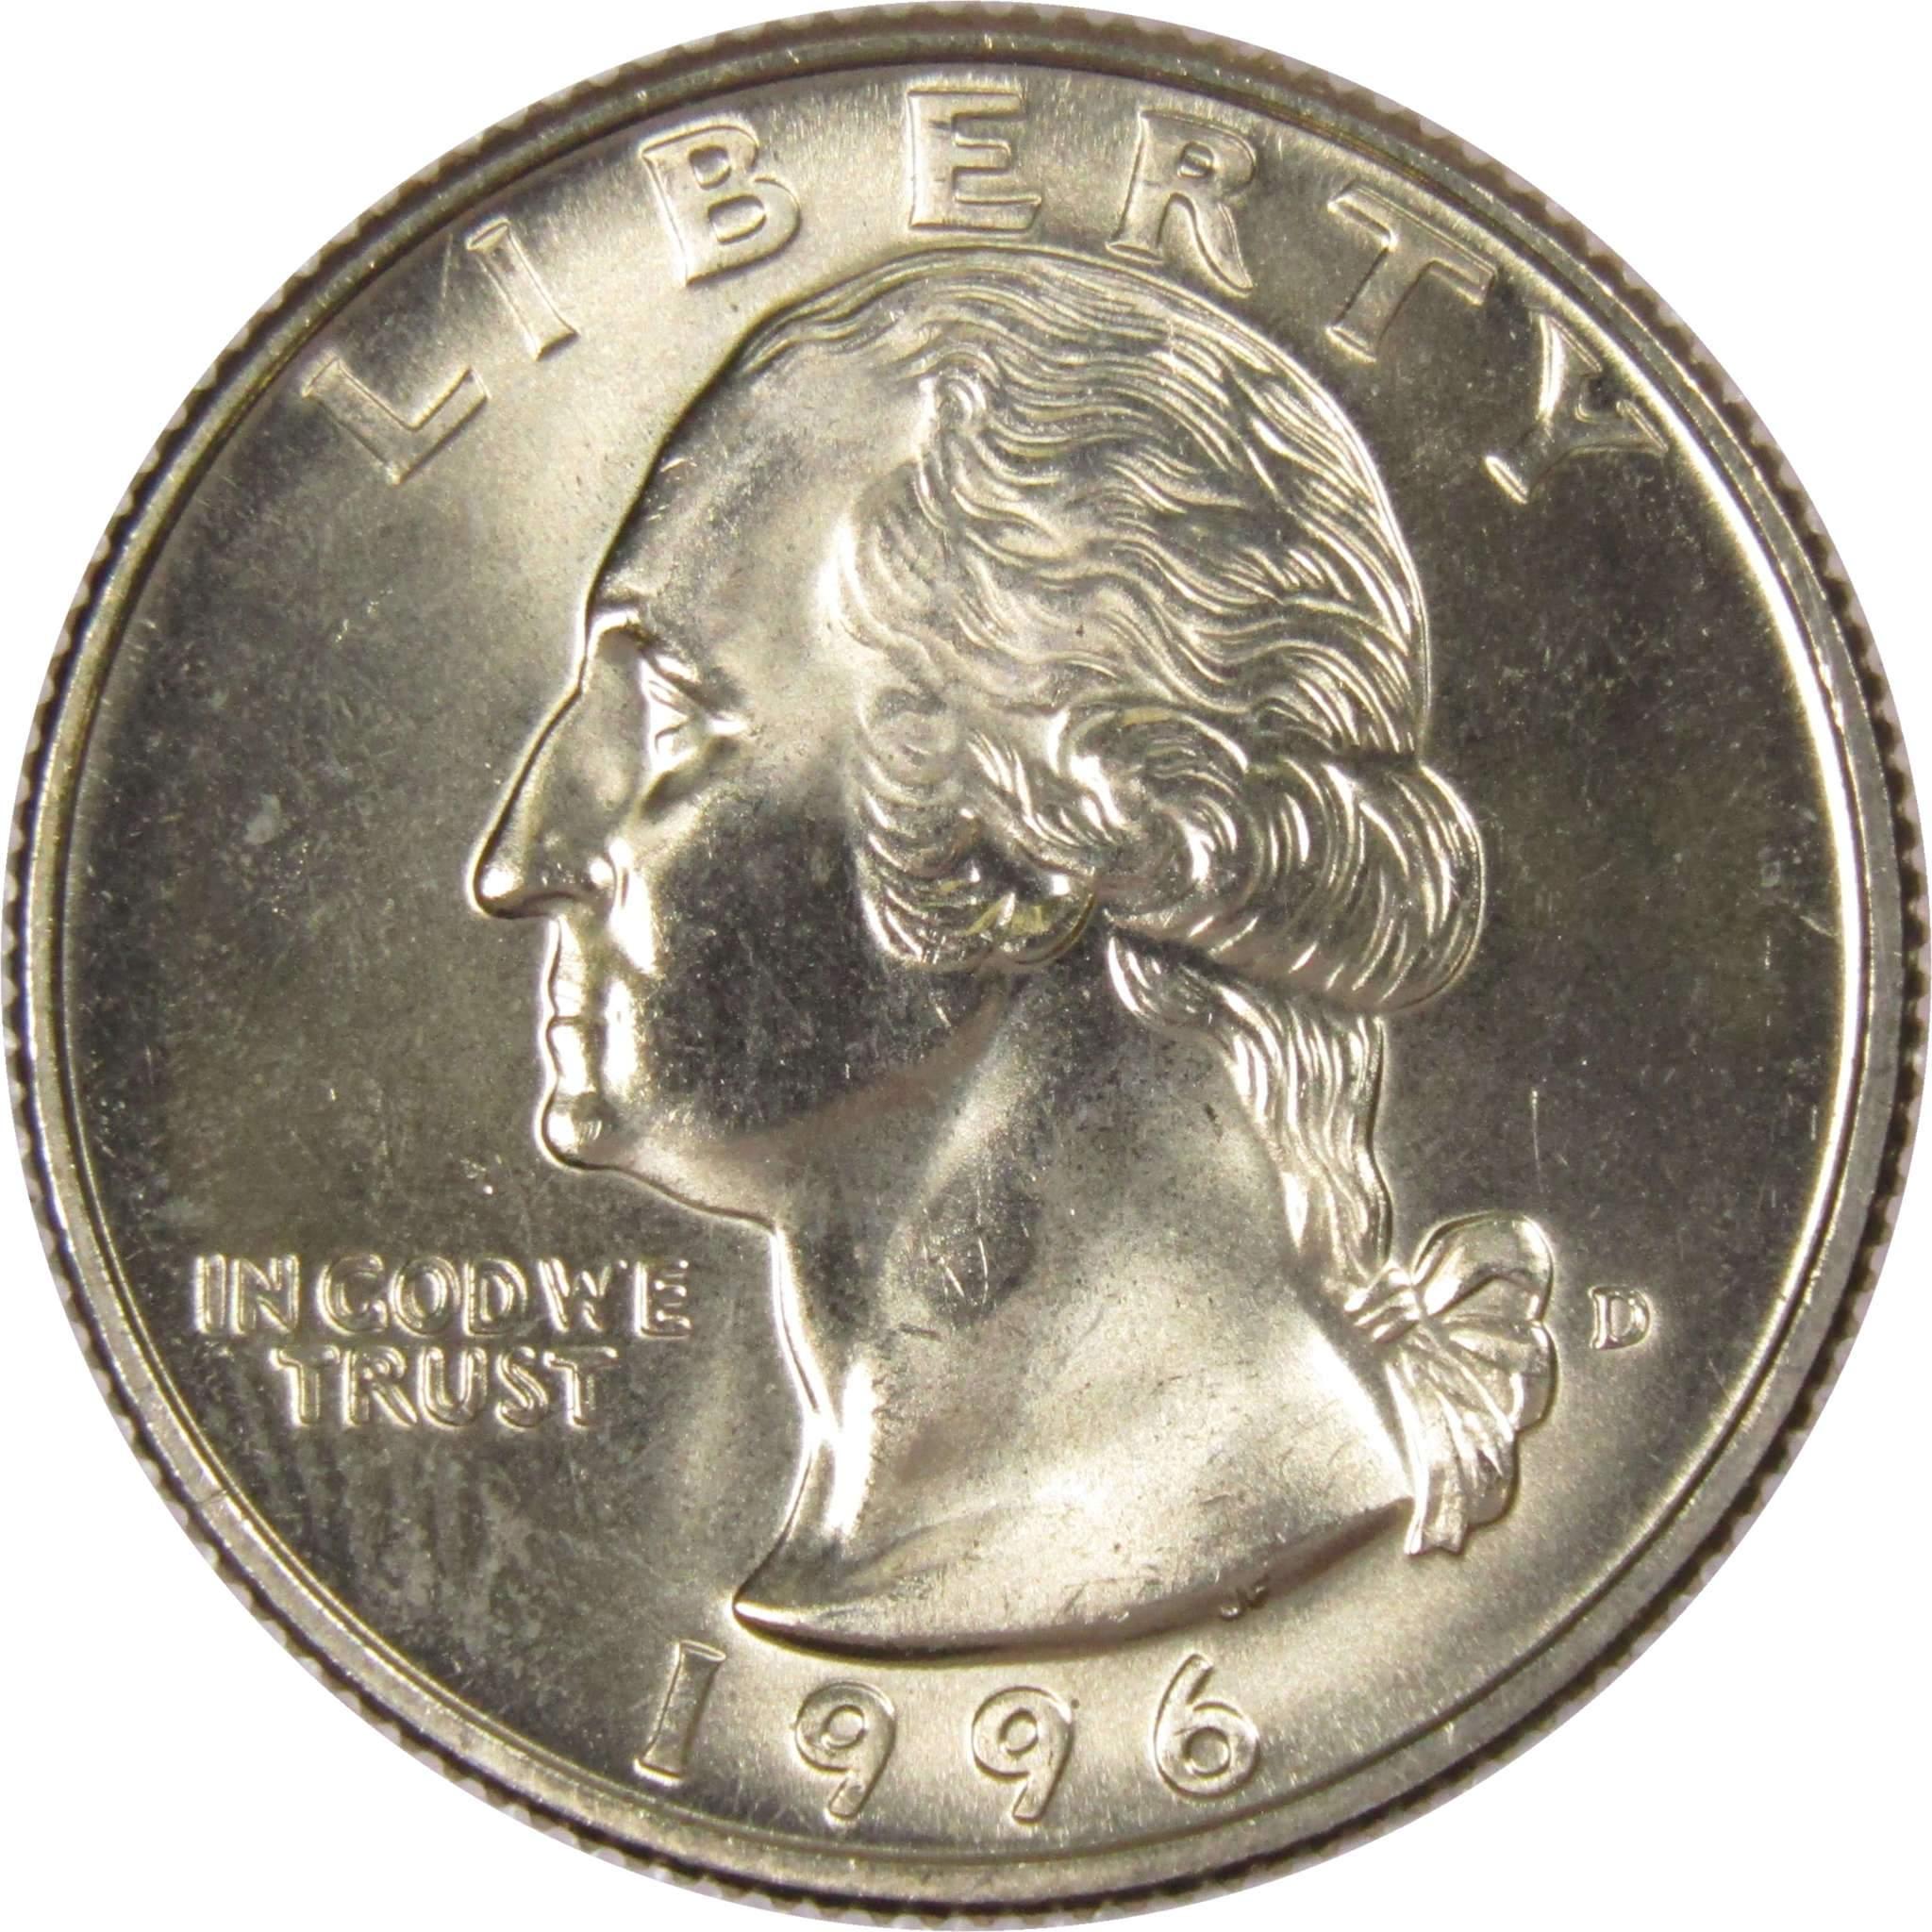 1996 D Washington Quarter BU Uncirculated Mint State 25c US Coin Collectible